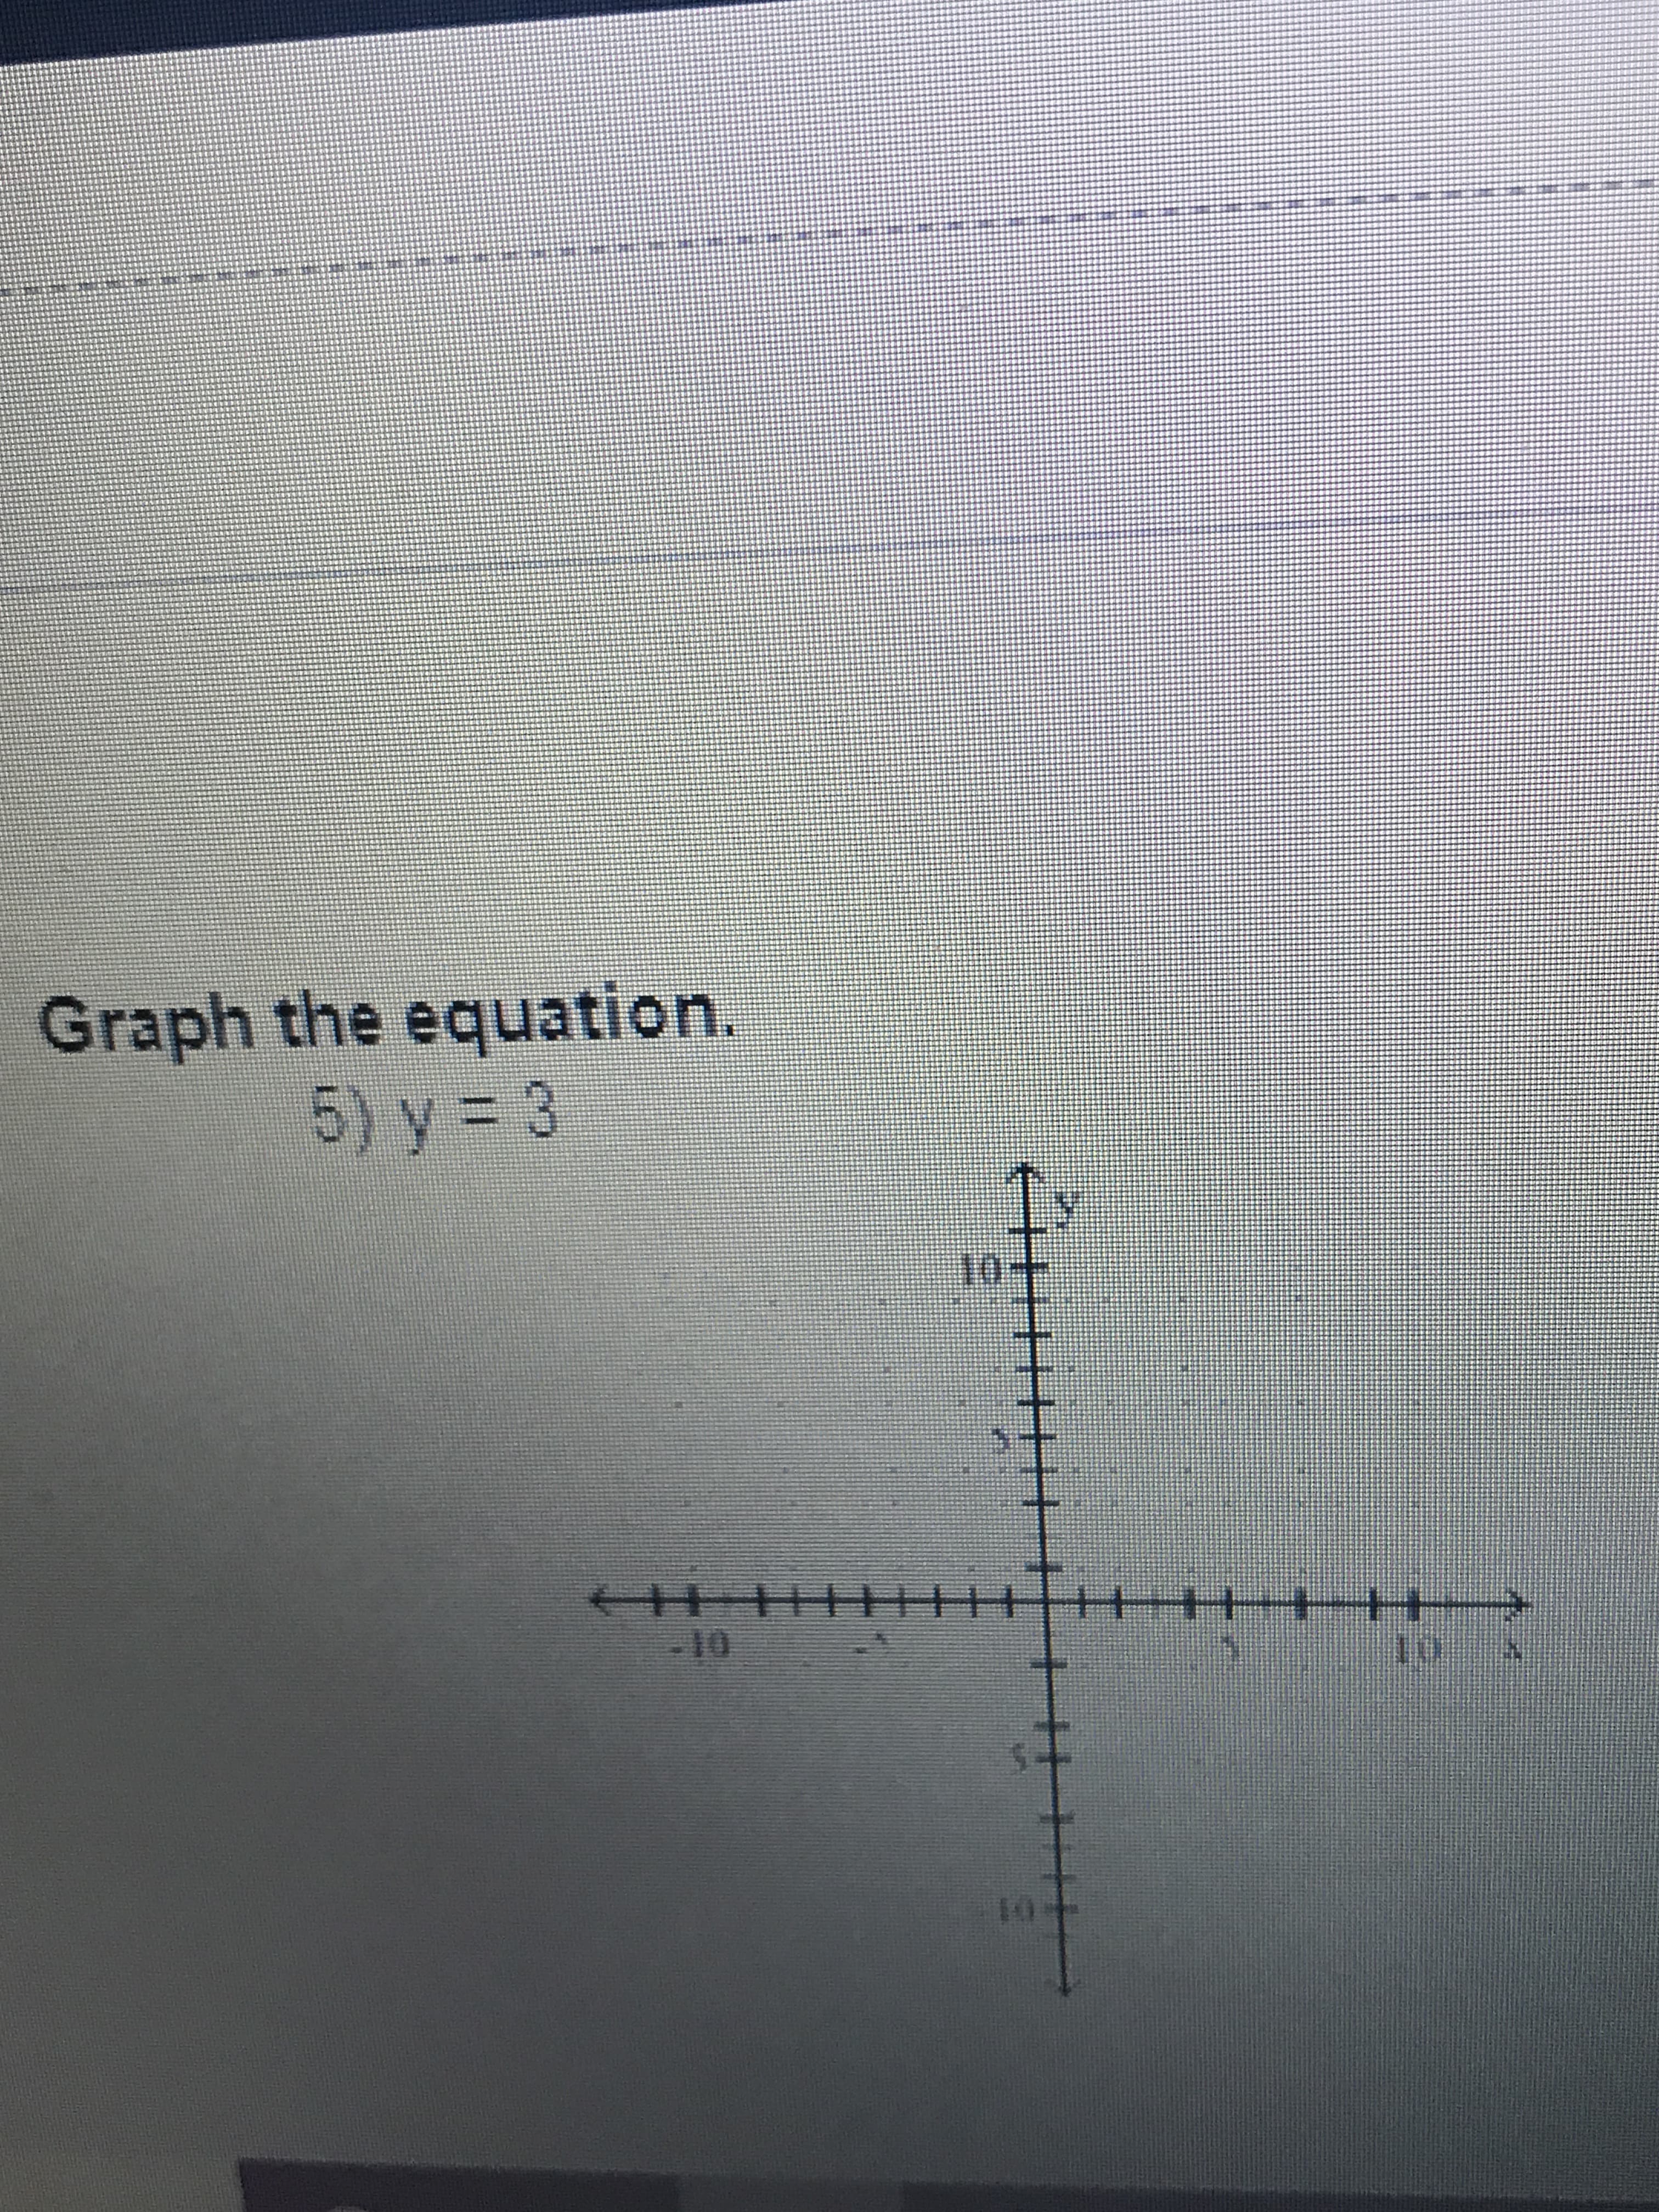 Graph the equation.
5) y= 3
